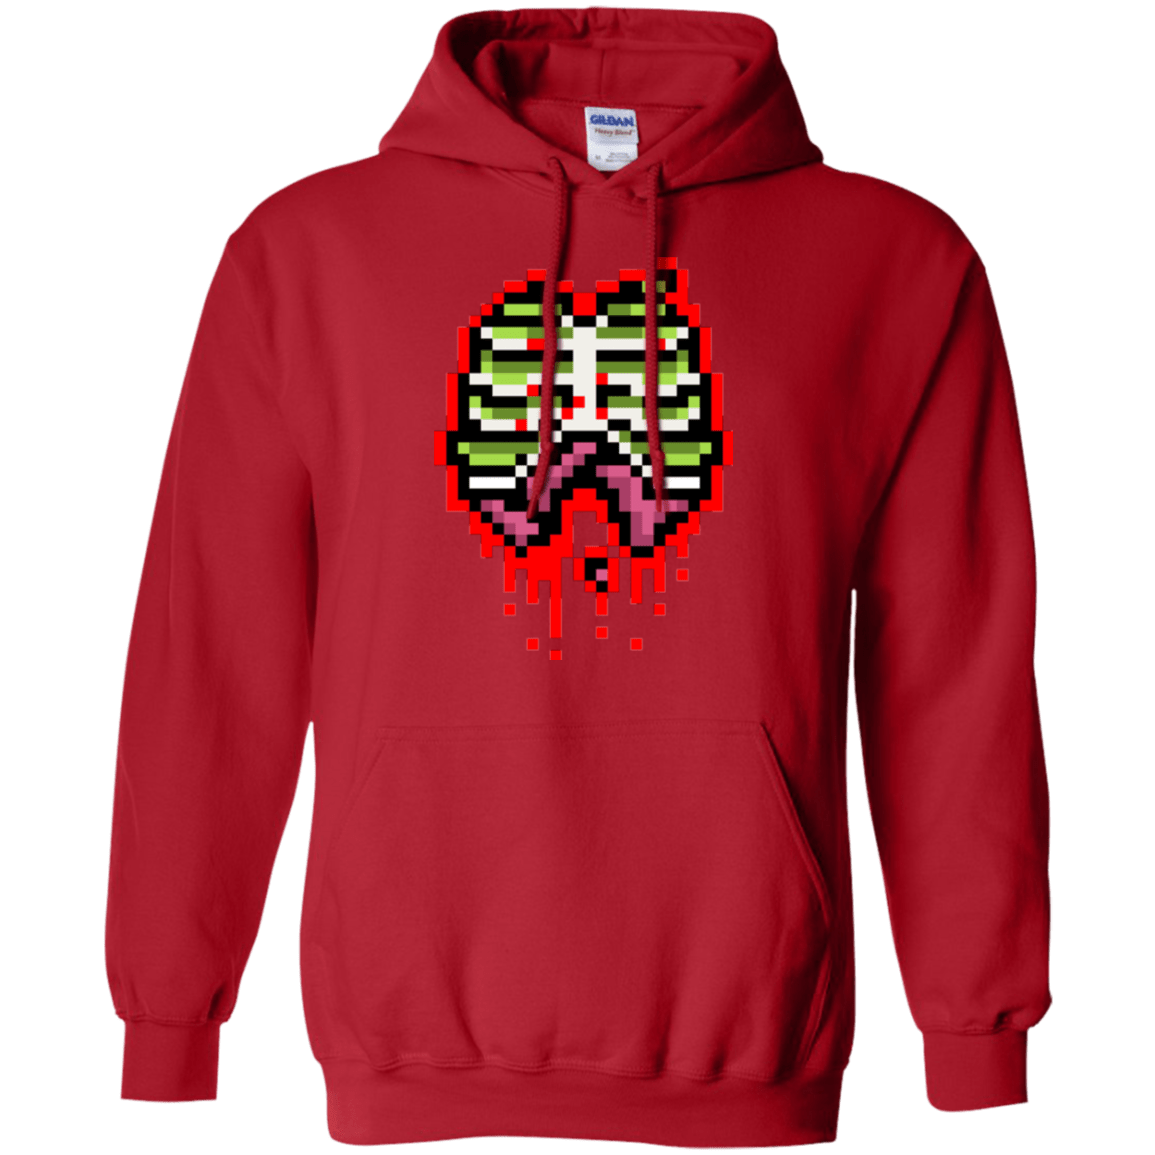 Sweatshirts Red / Small Zombie Guts Pullover Hoodie